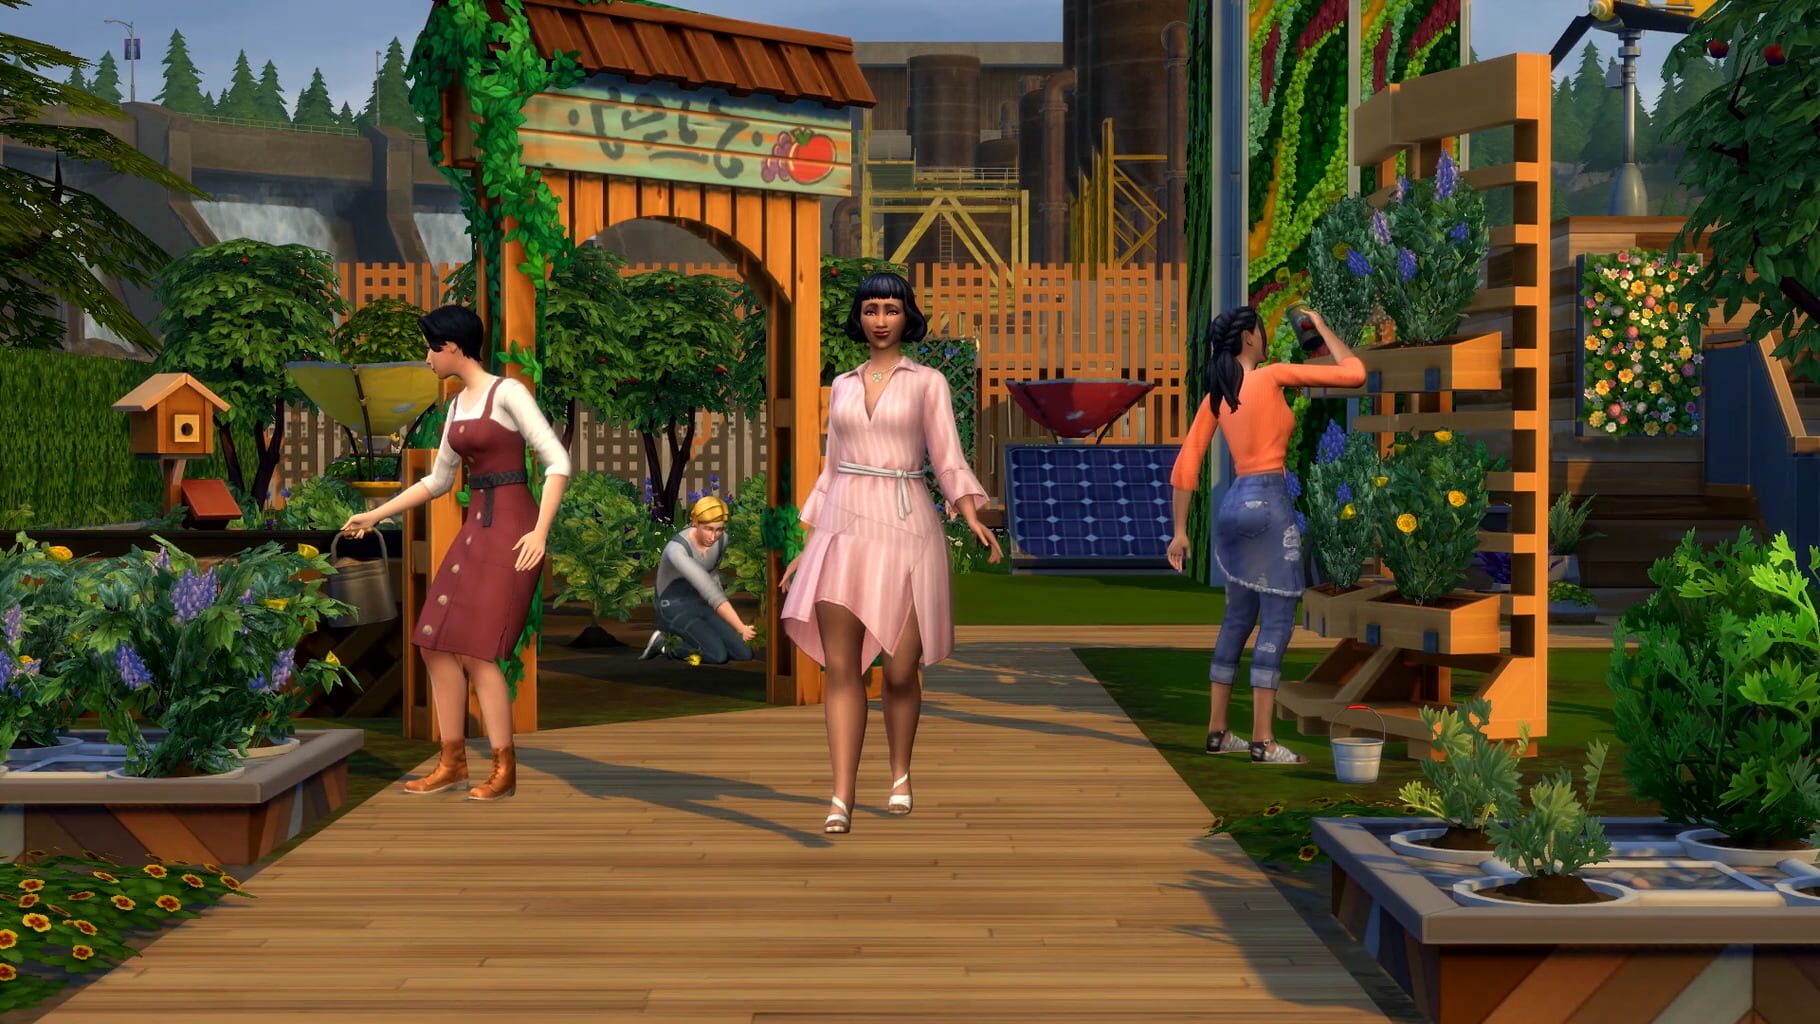 The Sims 4: Eco Lifestyle Image